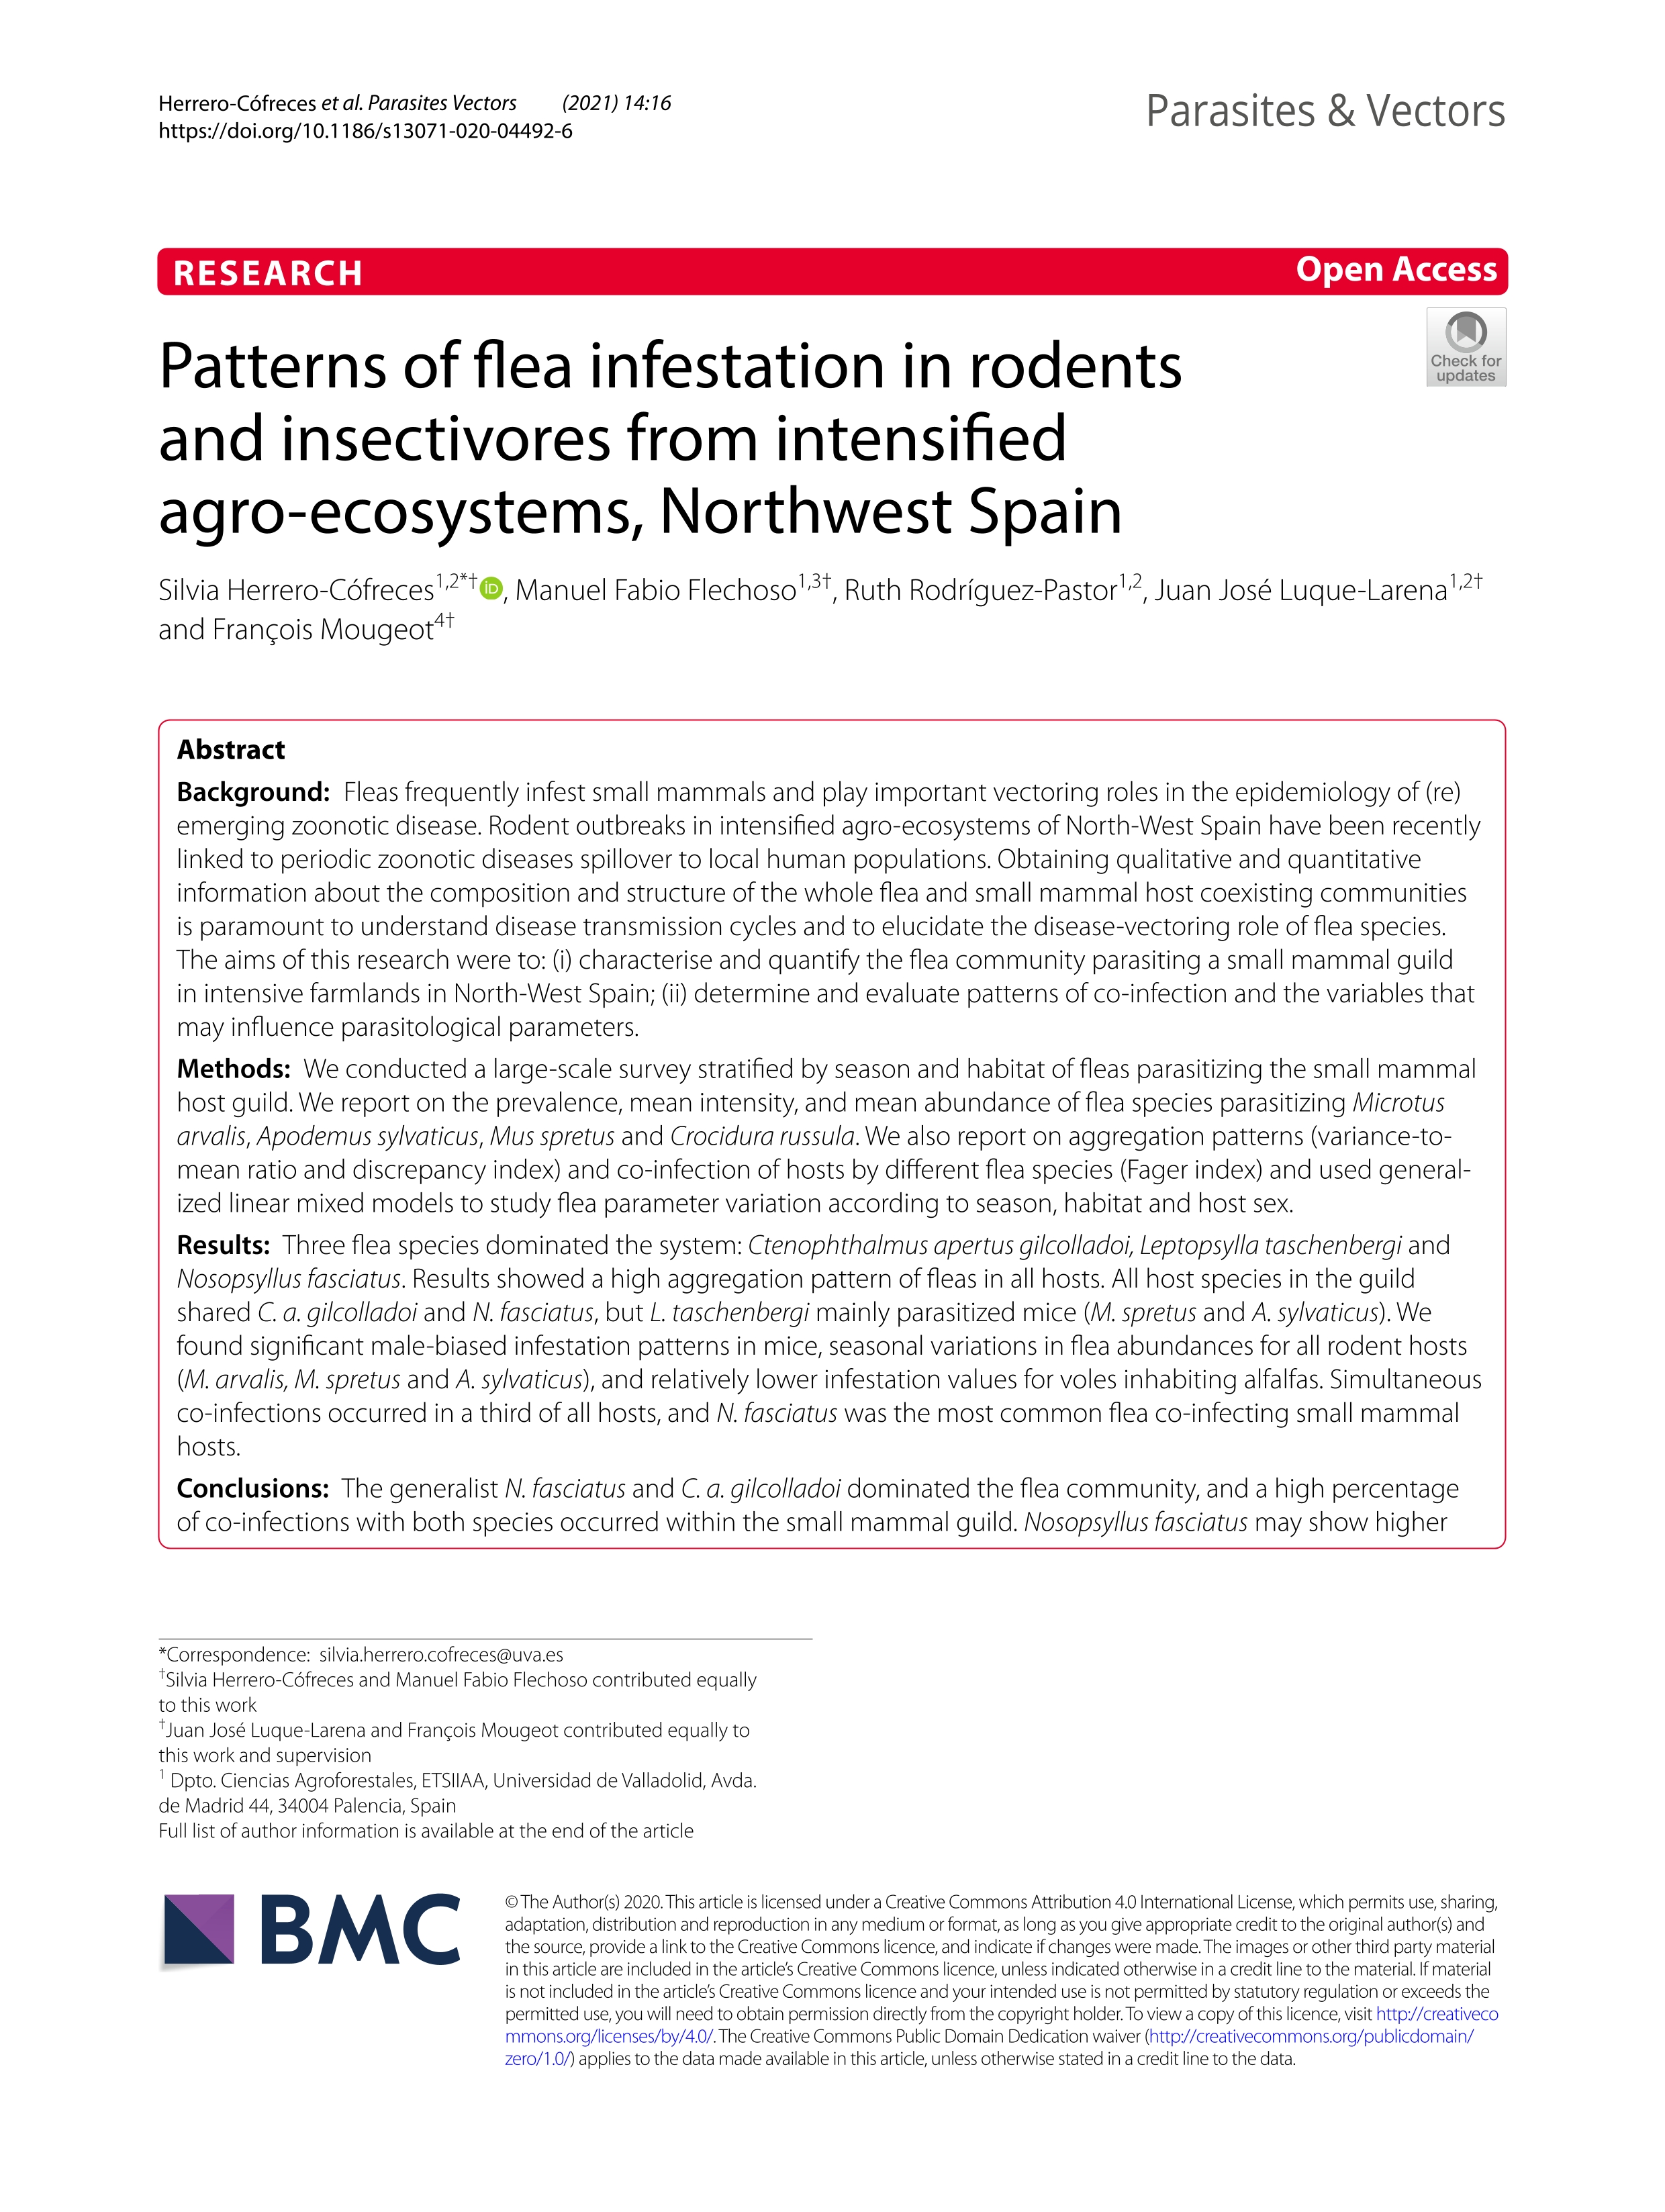 Patterns of flea infestation in rodents and insectivores from intensified agro-ecosystems, Northwest Spain.